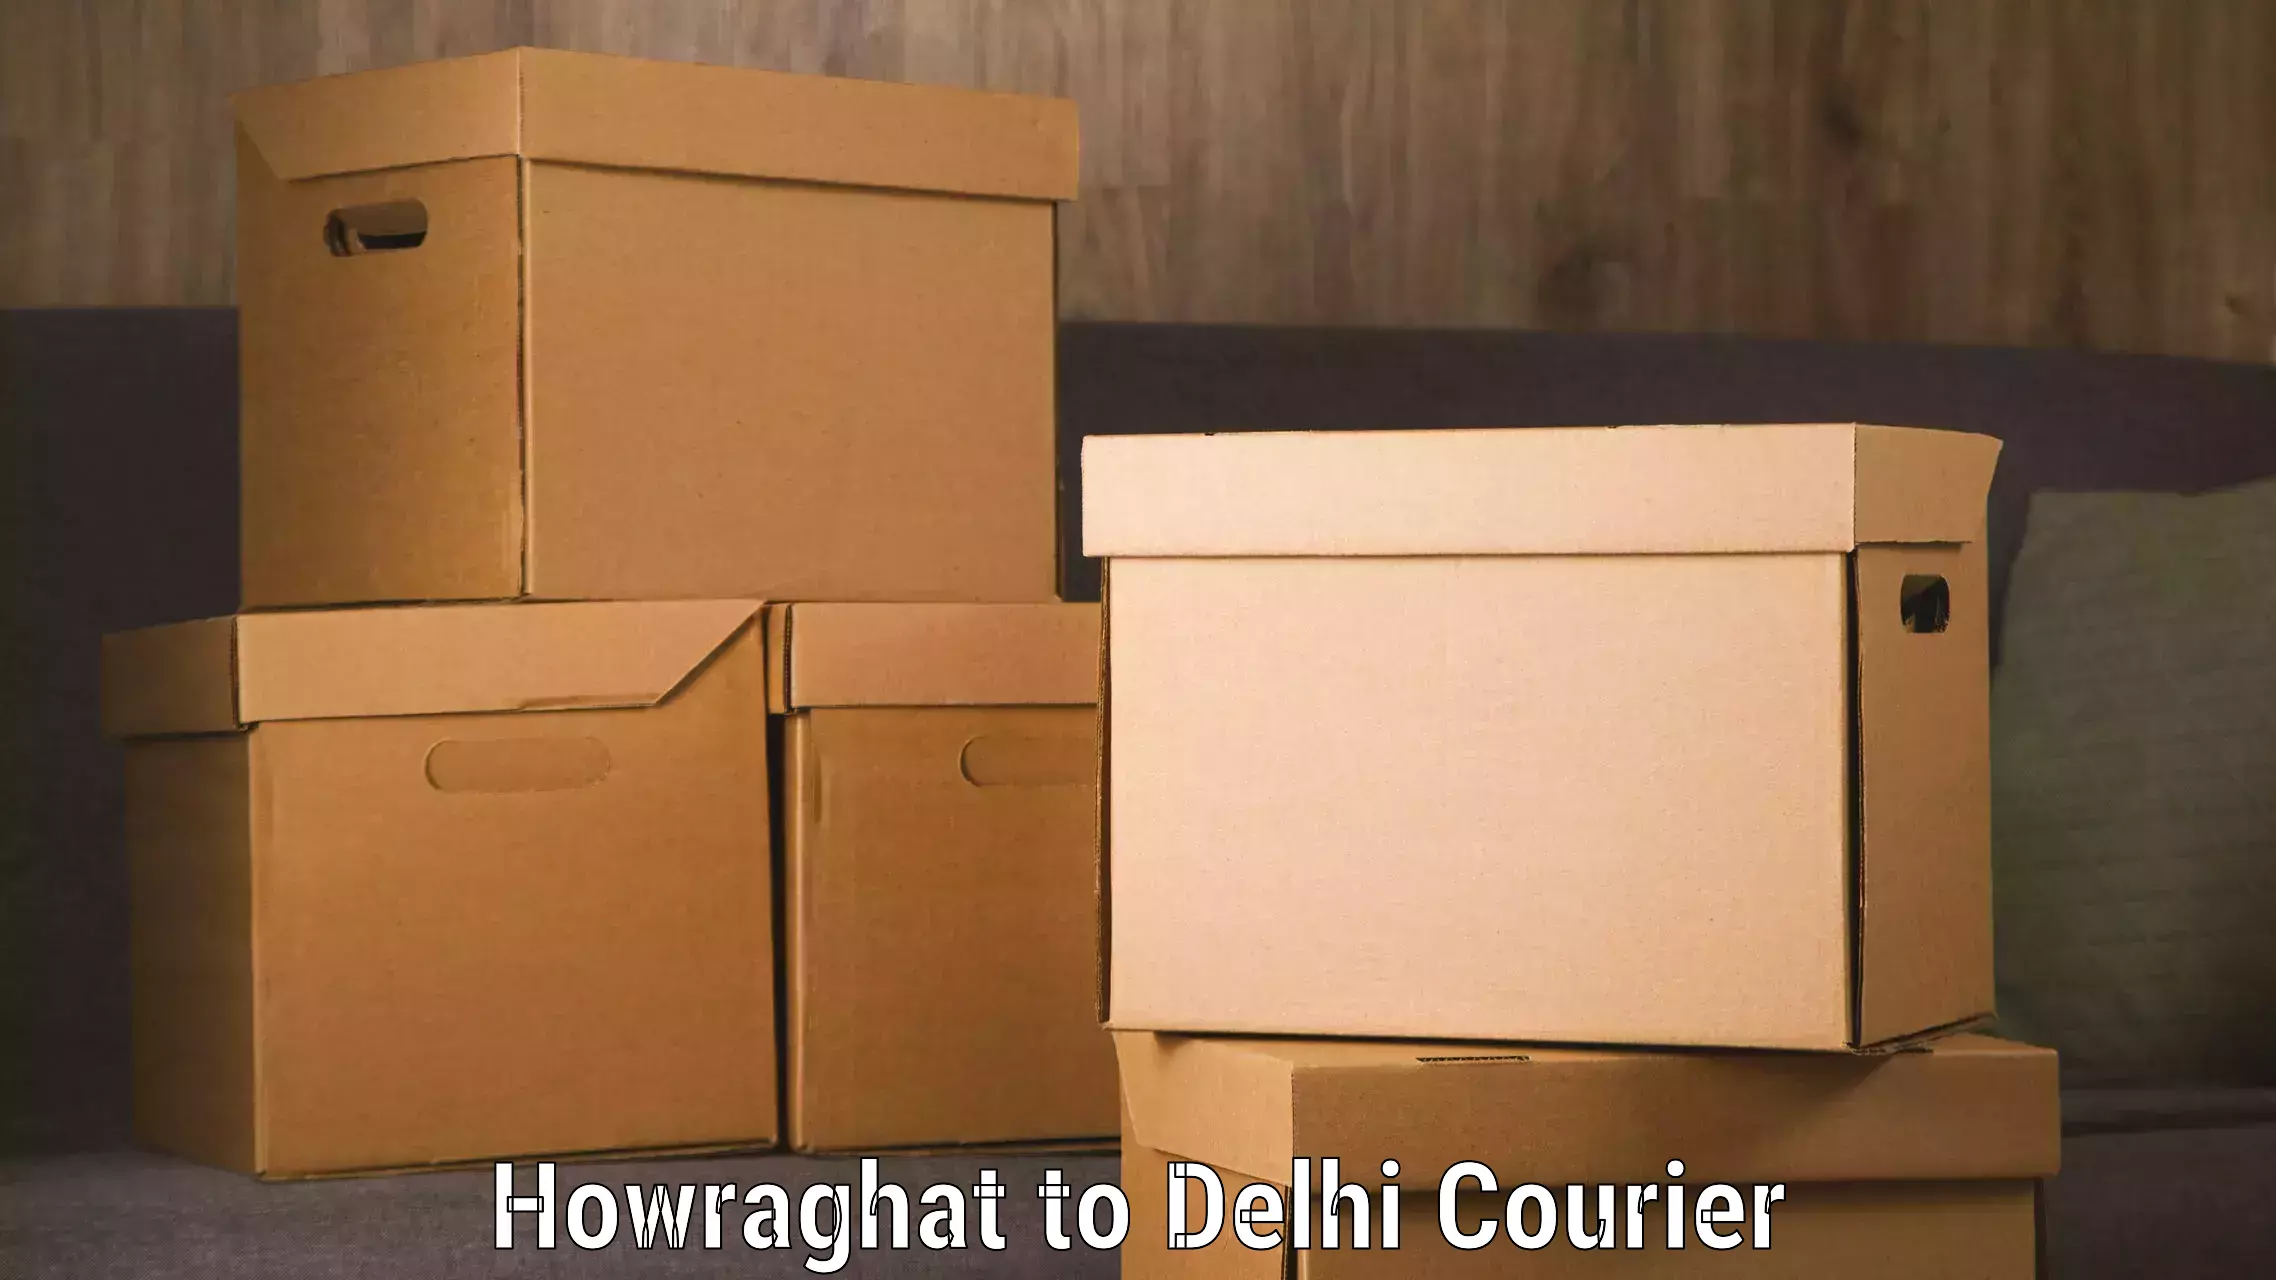 Luggage delivery system Howraghat to Sansad Marg